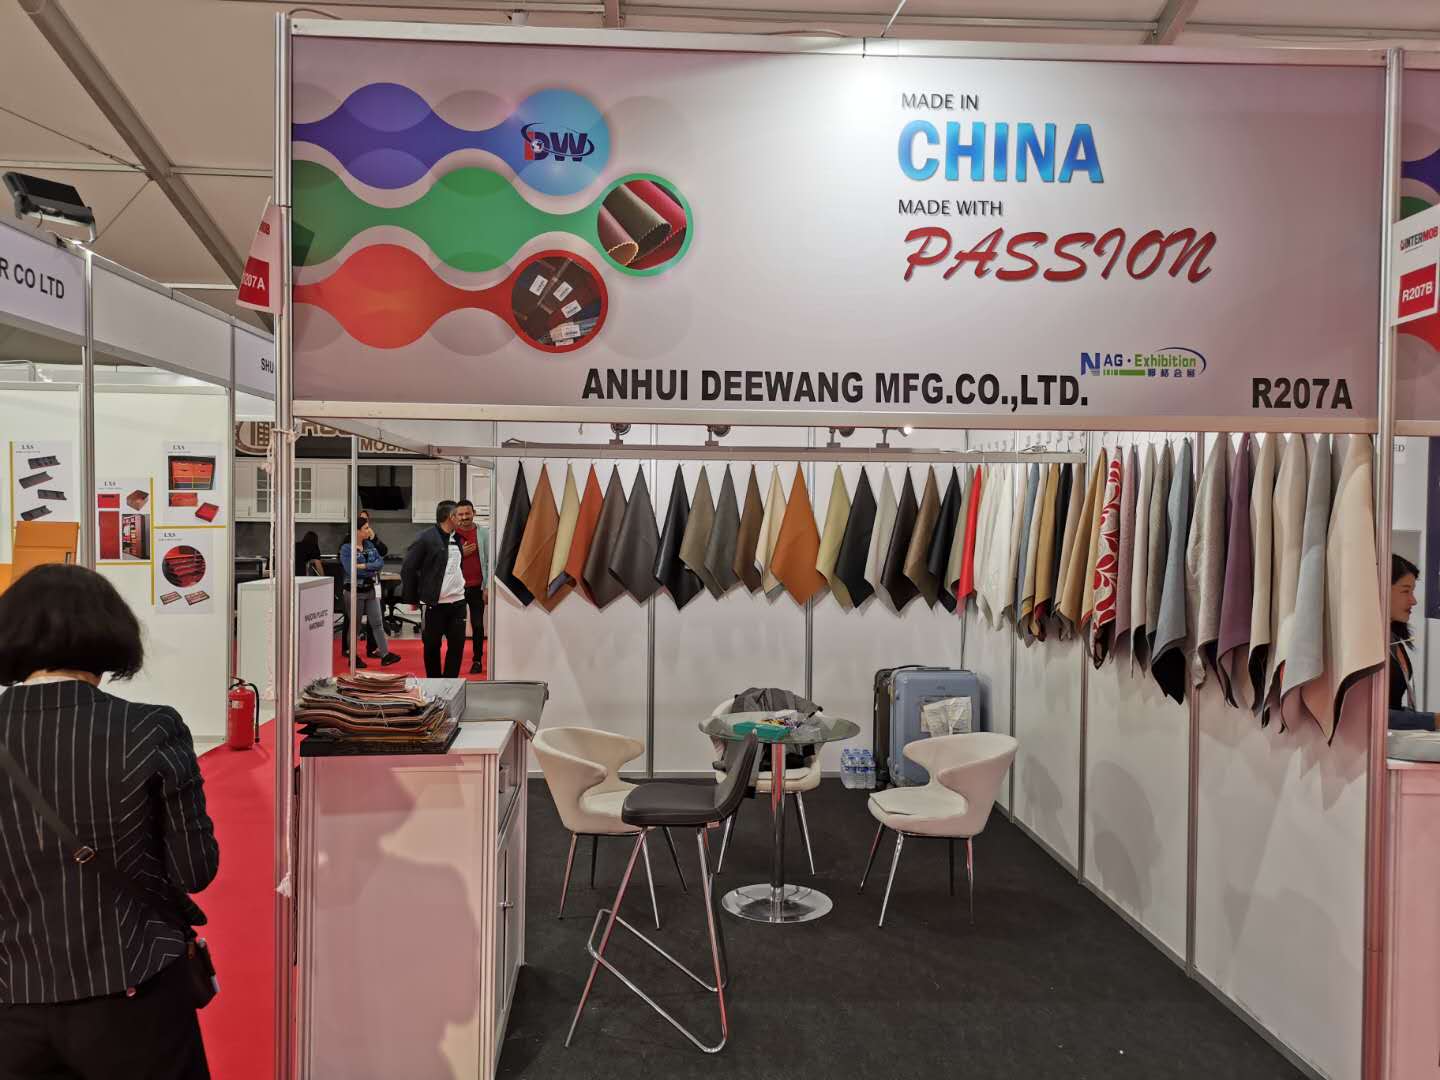 Anhui Deewang attended INTERMOB in Istanbul, Turkey Oct 2019